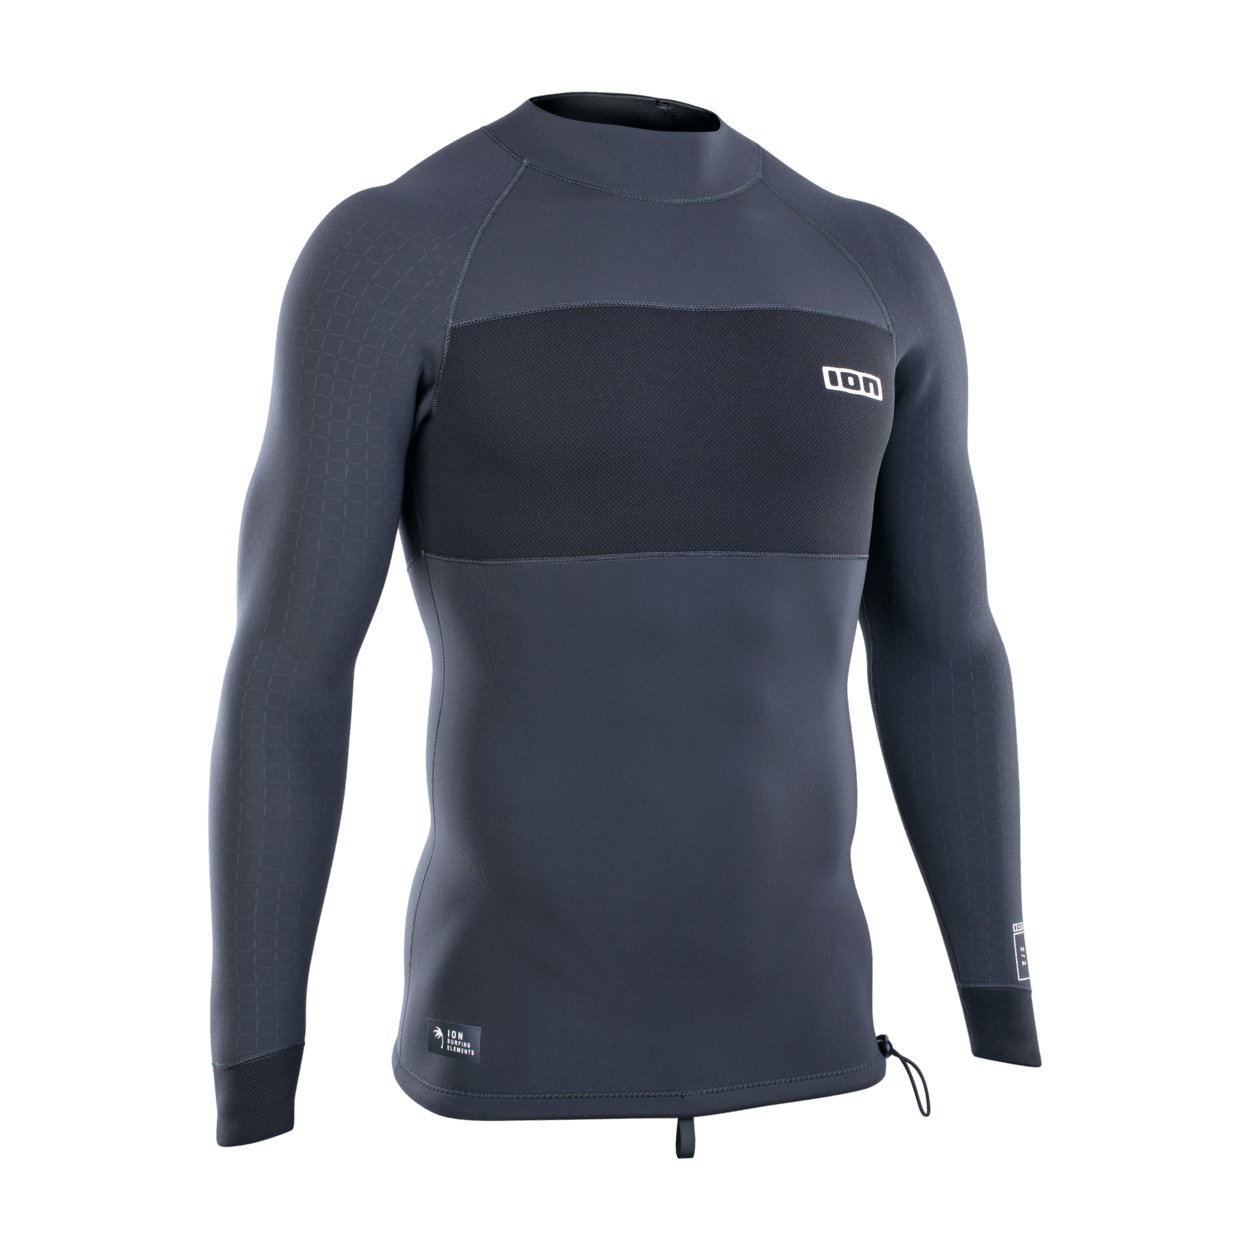 ION Neo Top 2/2 LS men 2022 - Worthing Watersports - 9010583058665 - Tops - ION Water